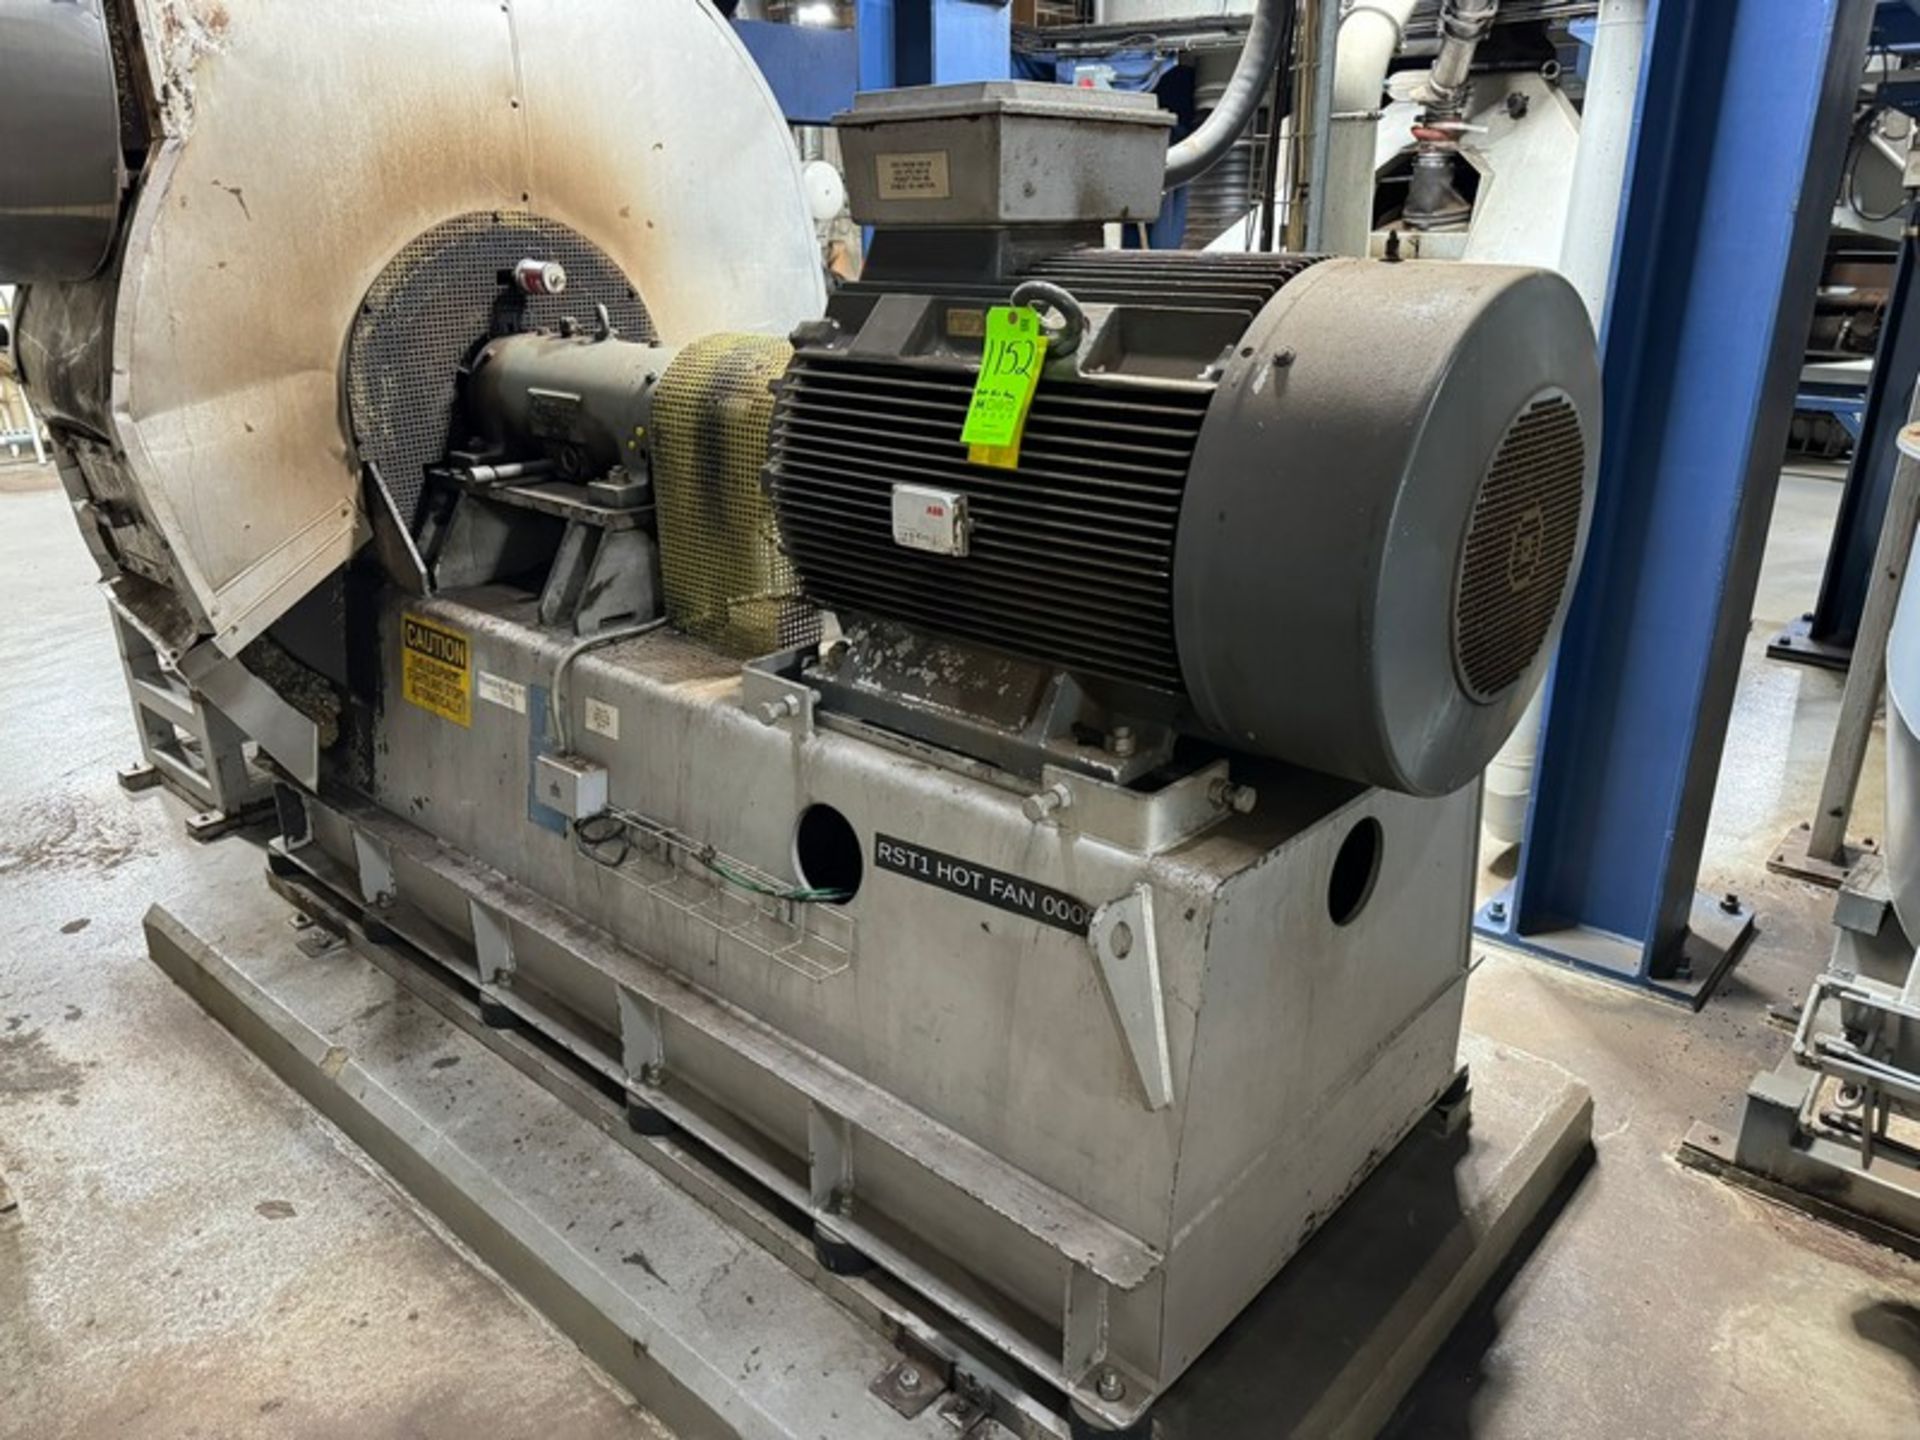 2006 Wartung der Öllager 160 kw Radial Hot Fan, Type: KXE 160-040030-60, S/N 212397, Includes Square - Image 3 of 15